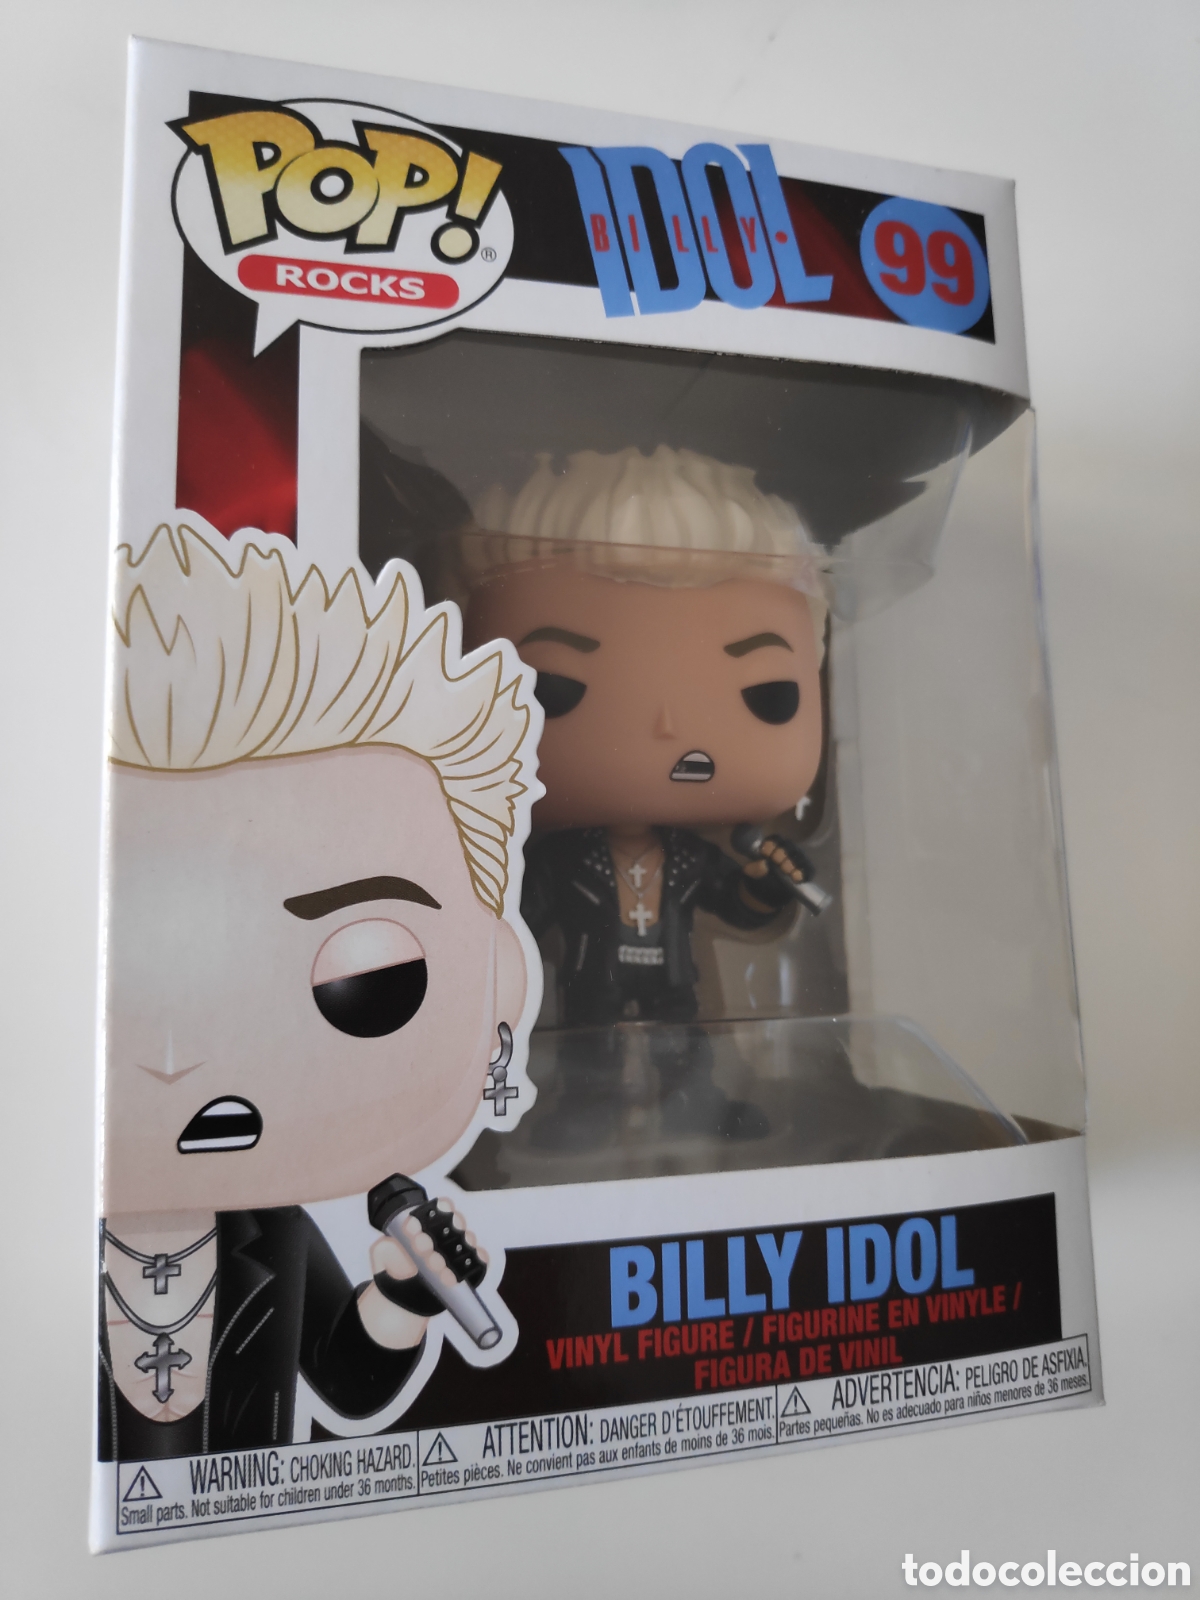 figura funko pop billy idol nuevo - Other action figures on todocoleccion